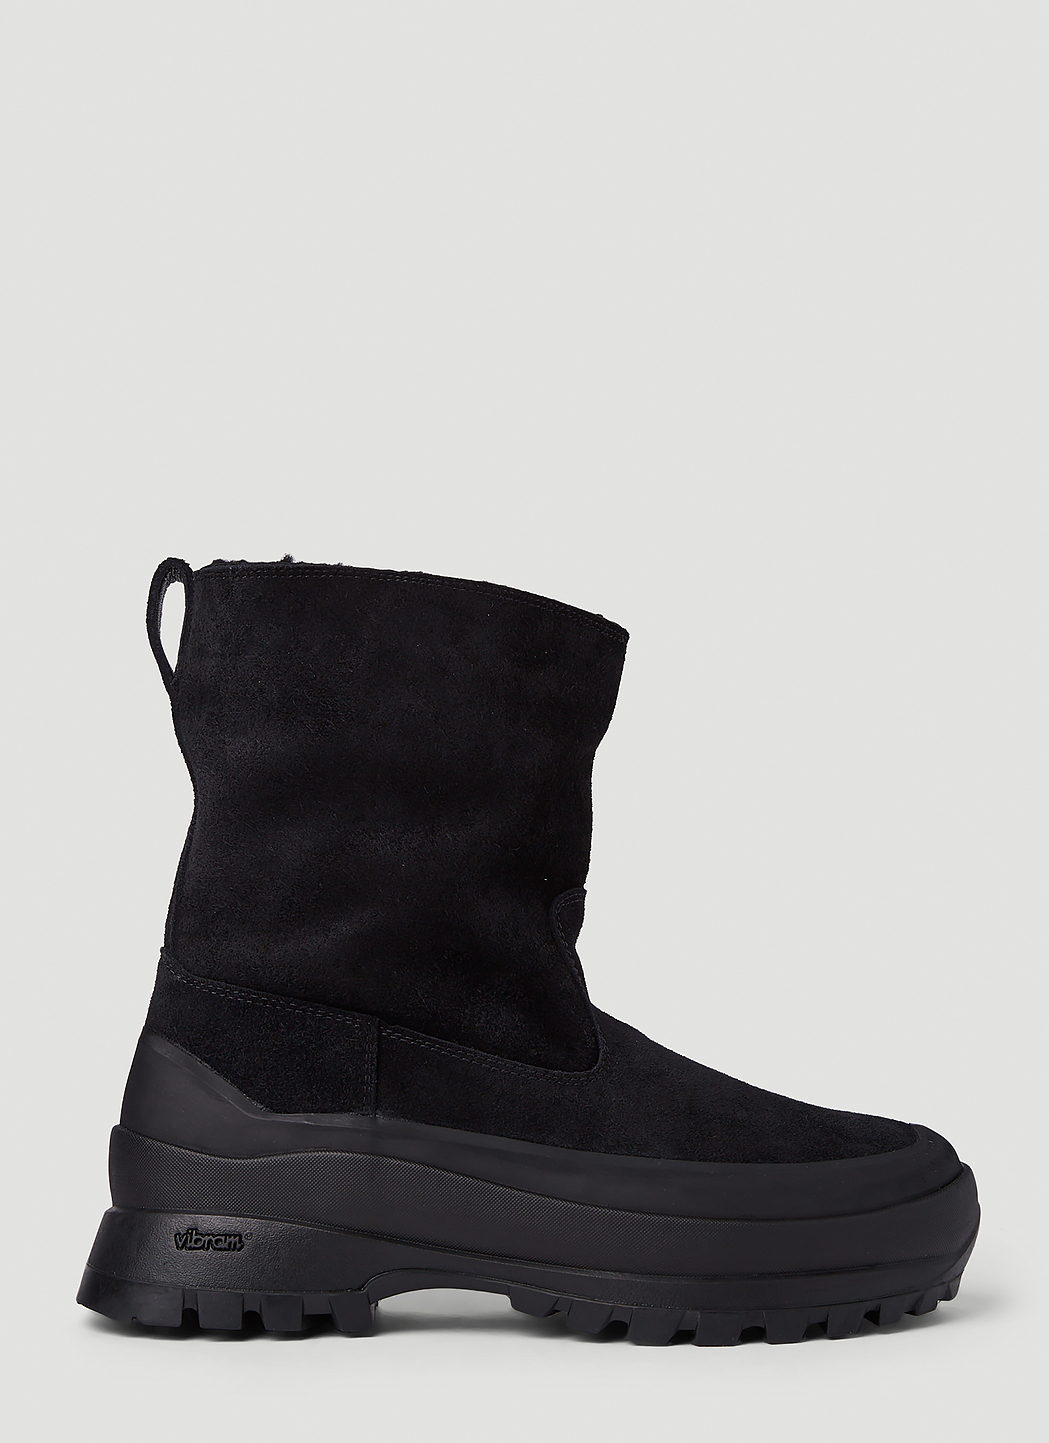 Belluno Shearling Lined Boots